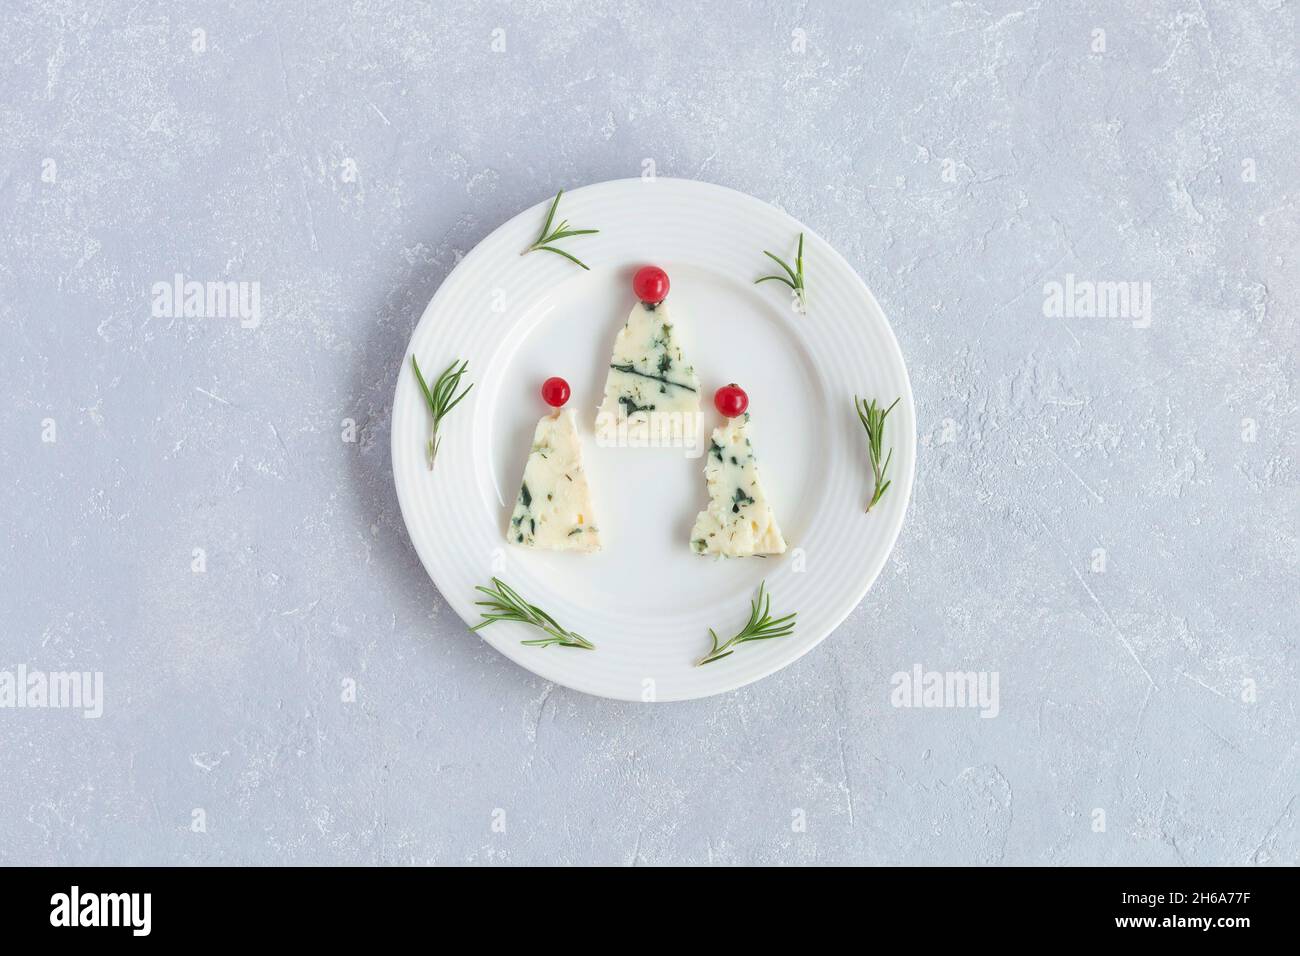 new year trees made of roquefort cheese and decorated with red currants, on a plate, grey background, top view Stock Photo